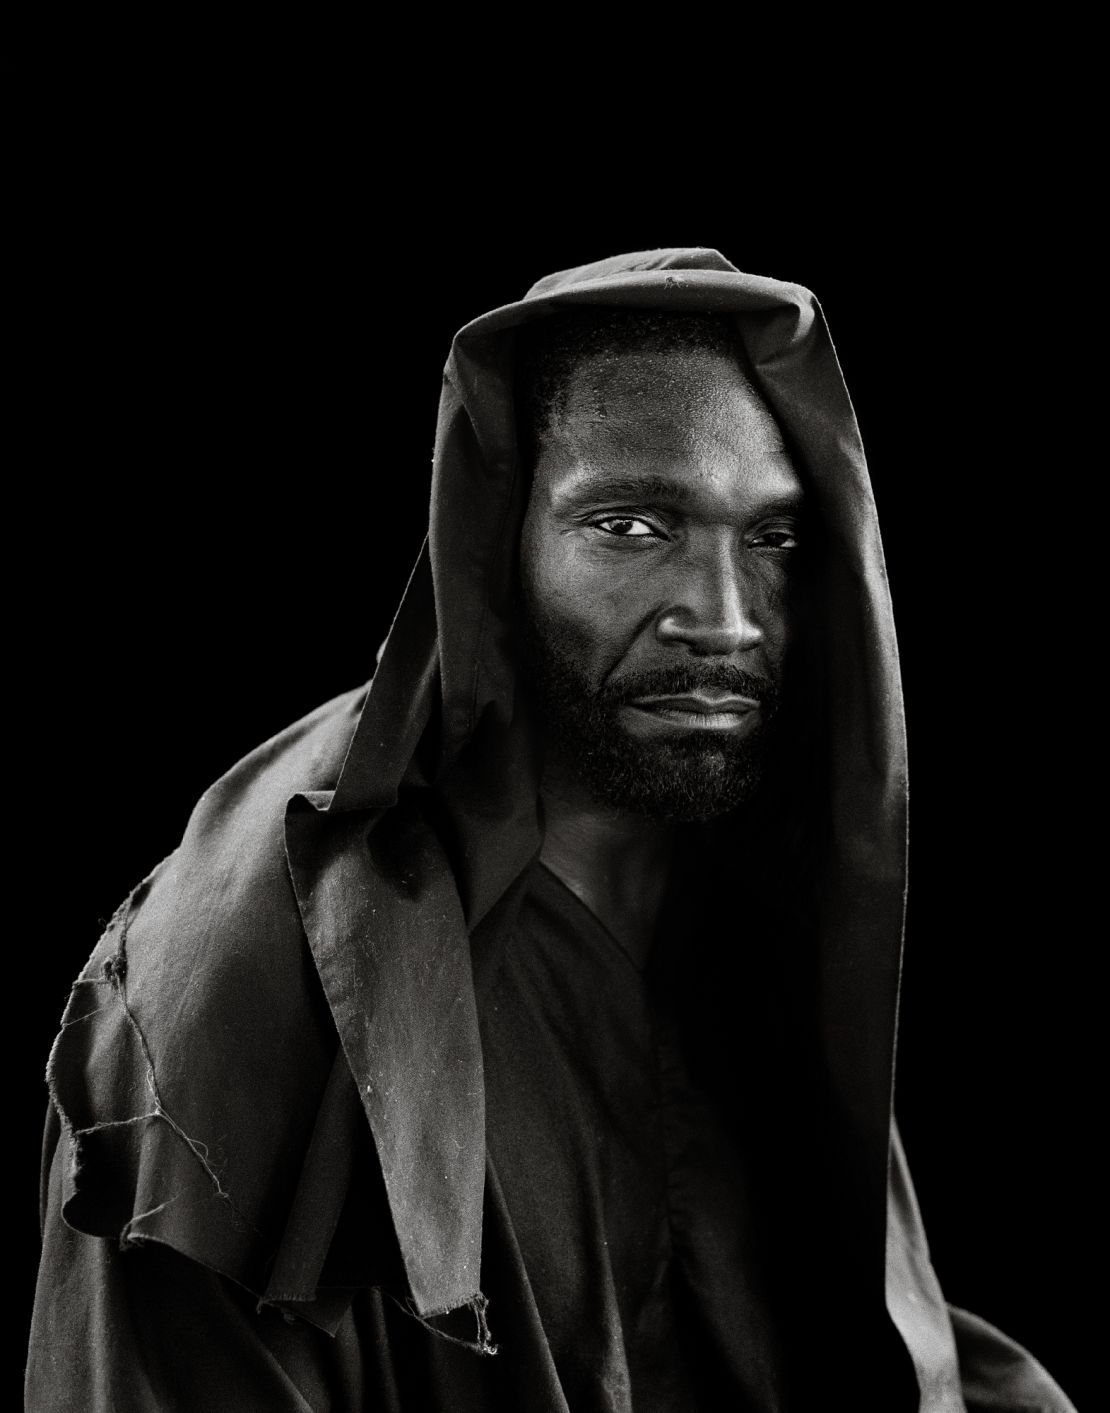 "Levelle 'Black' Tolliver (Judas)" from the series Passion Play (2012--13) by Deborah Luster